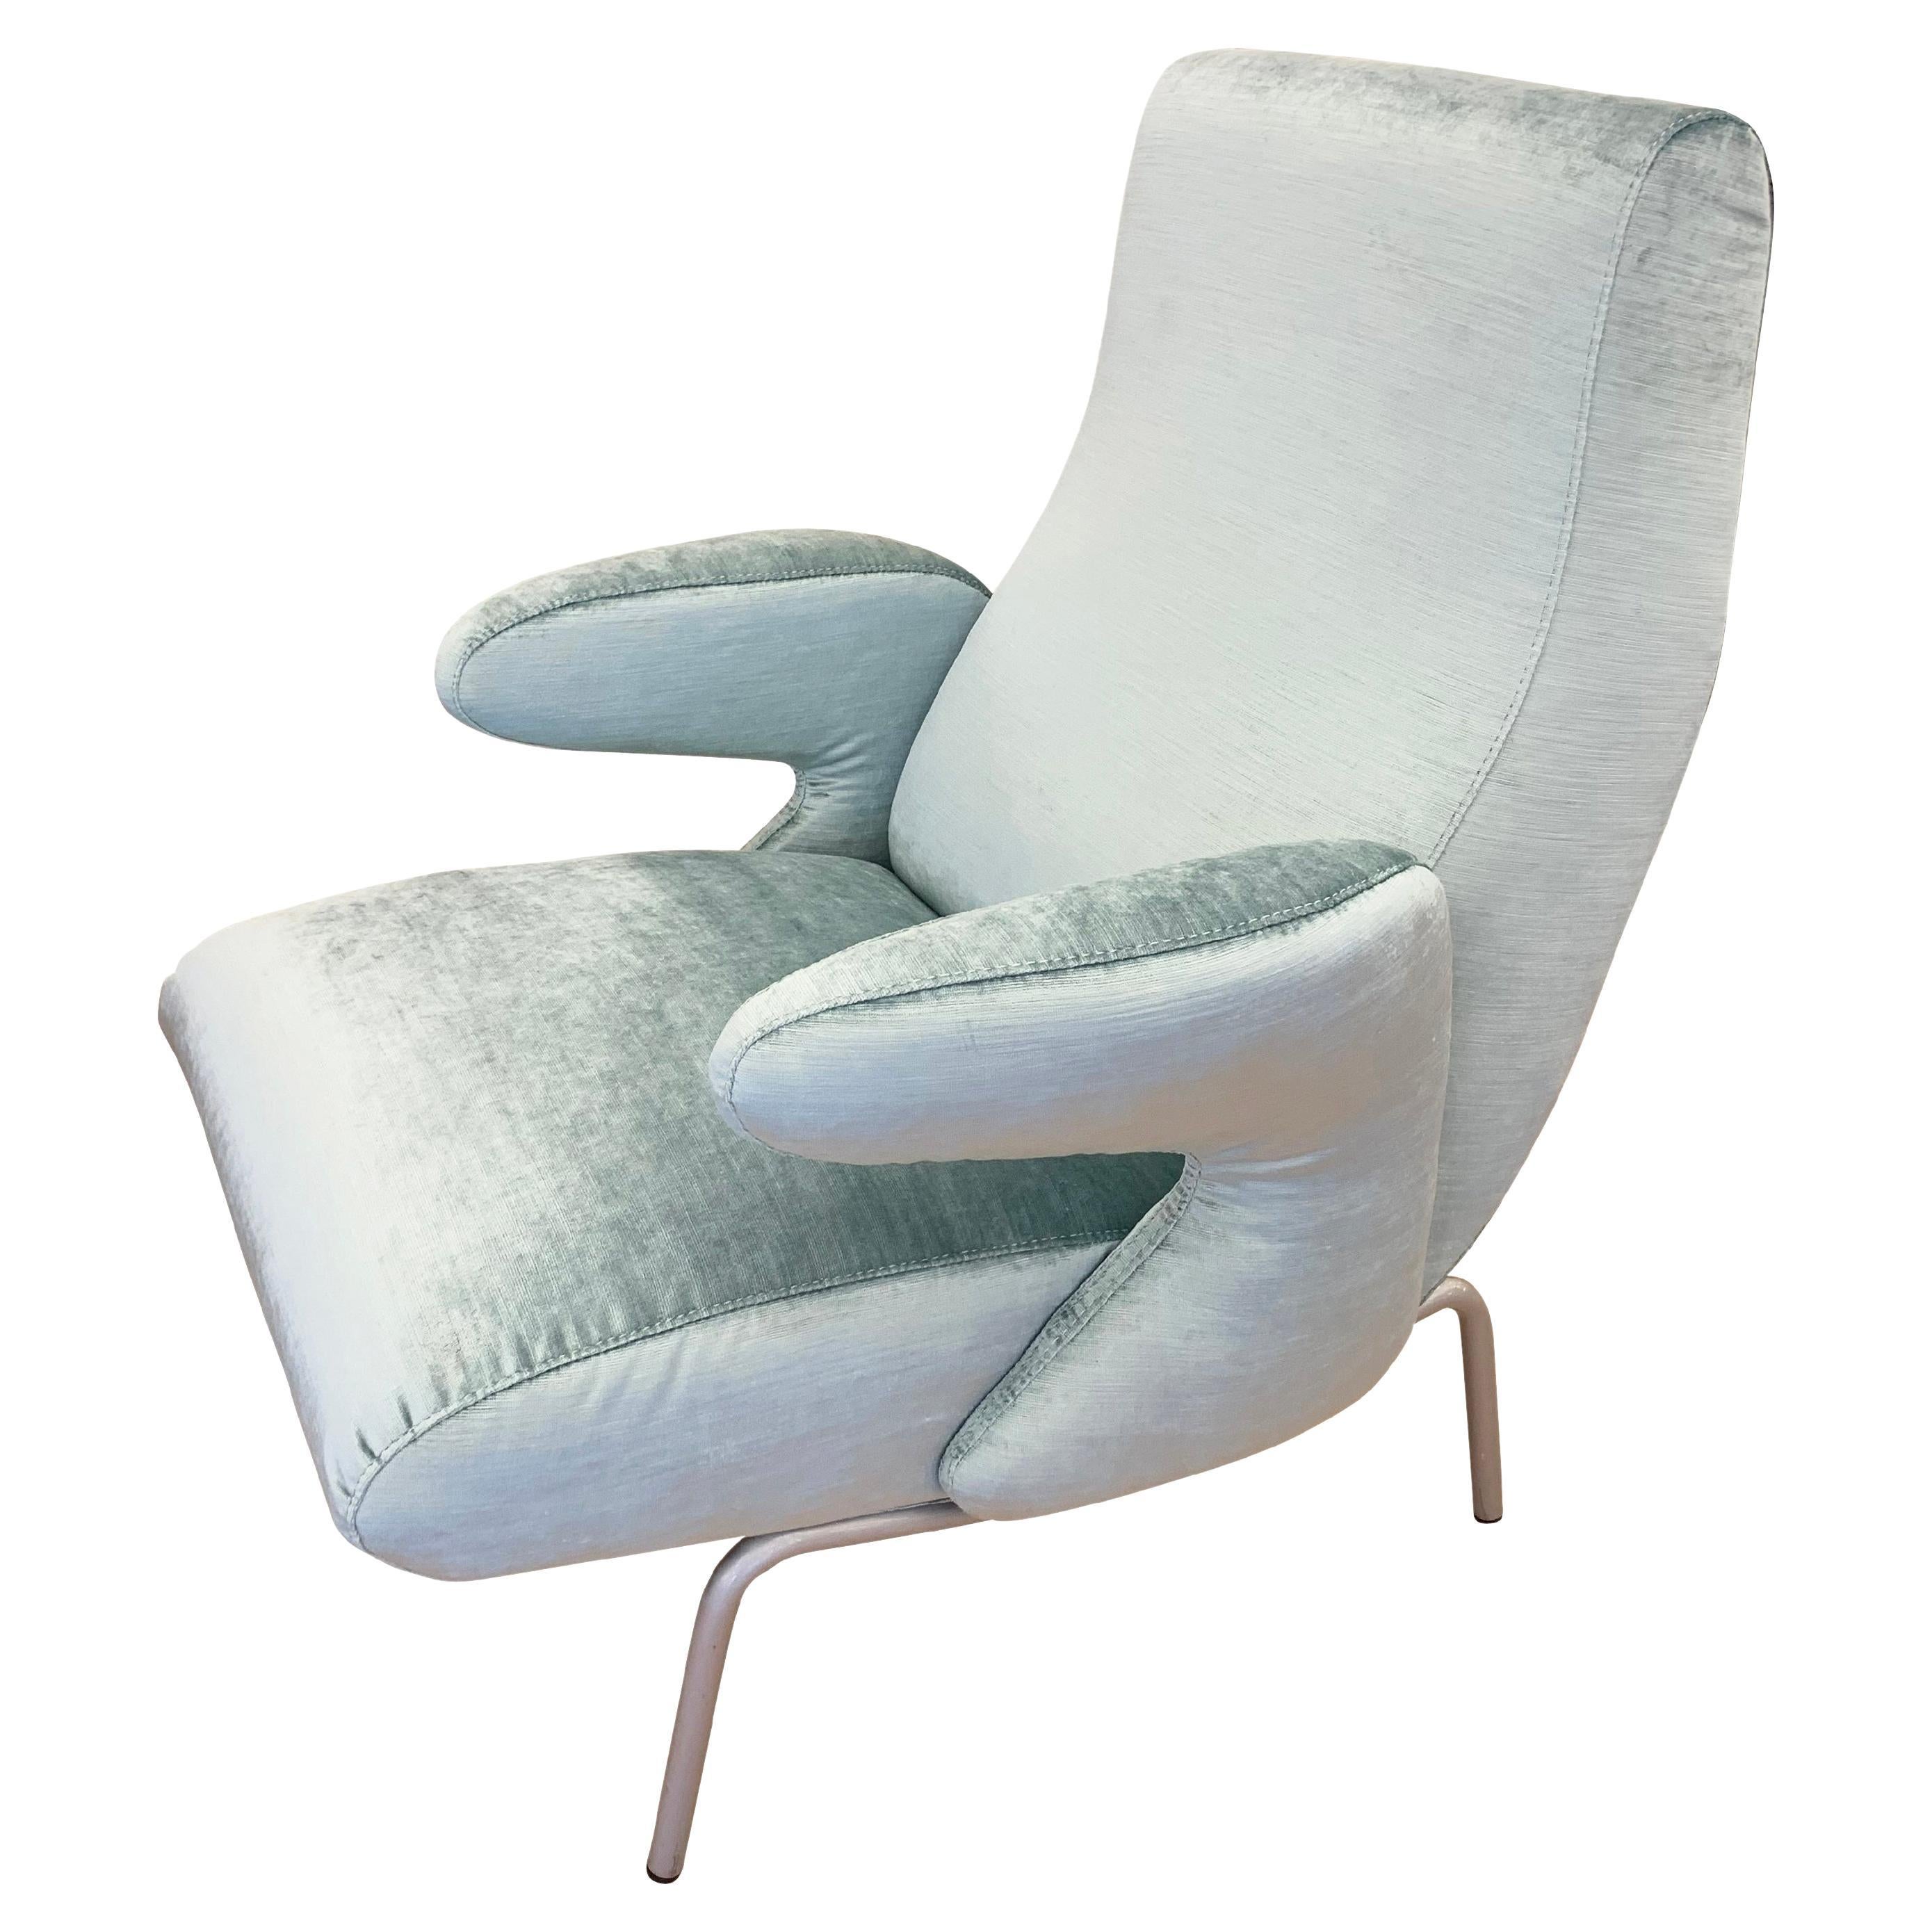 Carboni for Arflex "Dolphin" Lounge Chair, Italy, 1950s For Sale